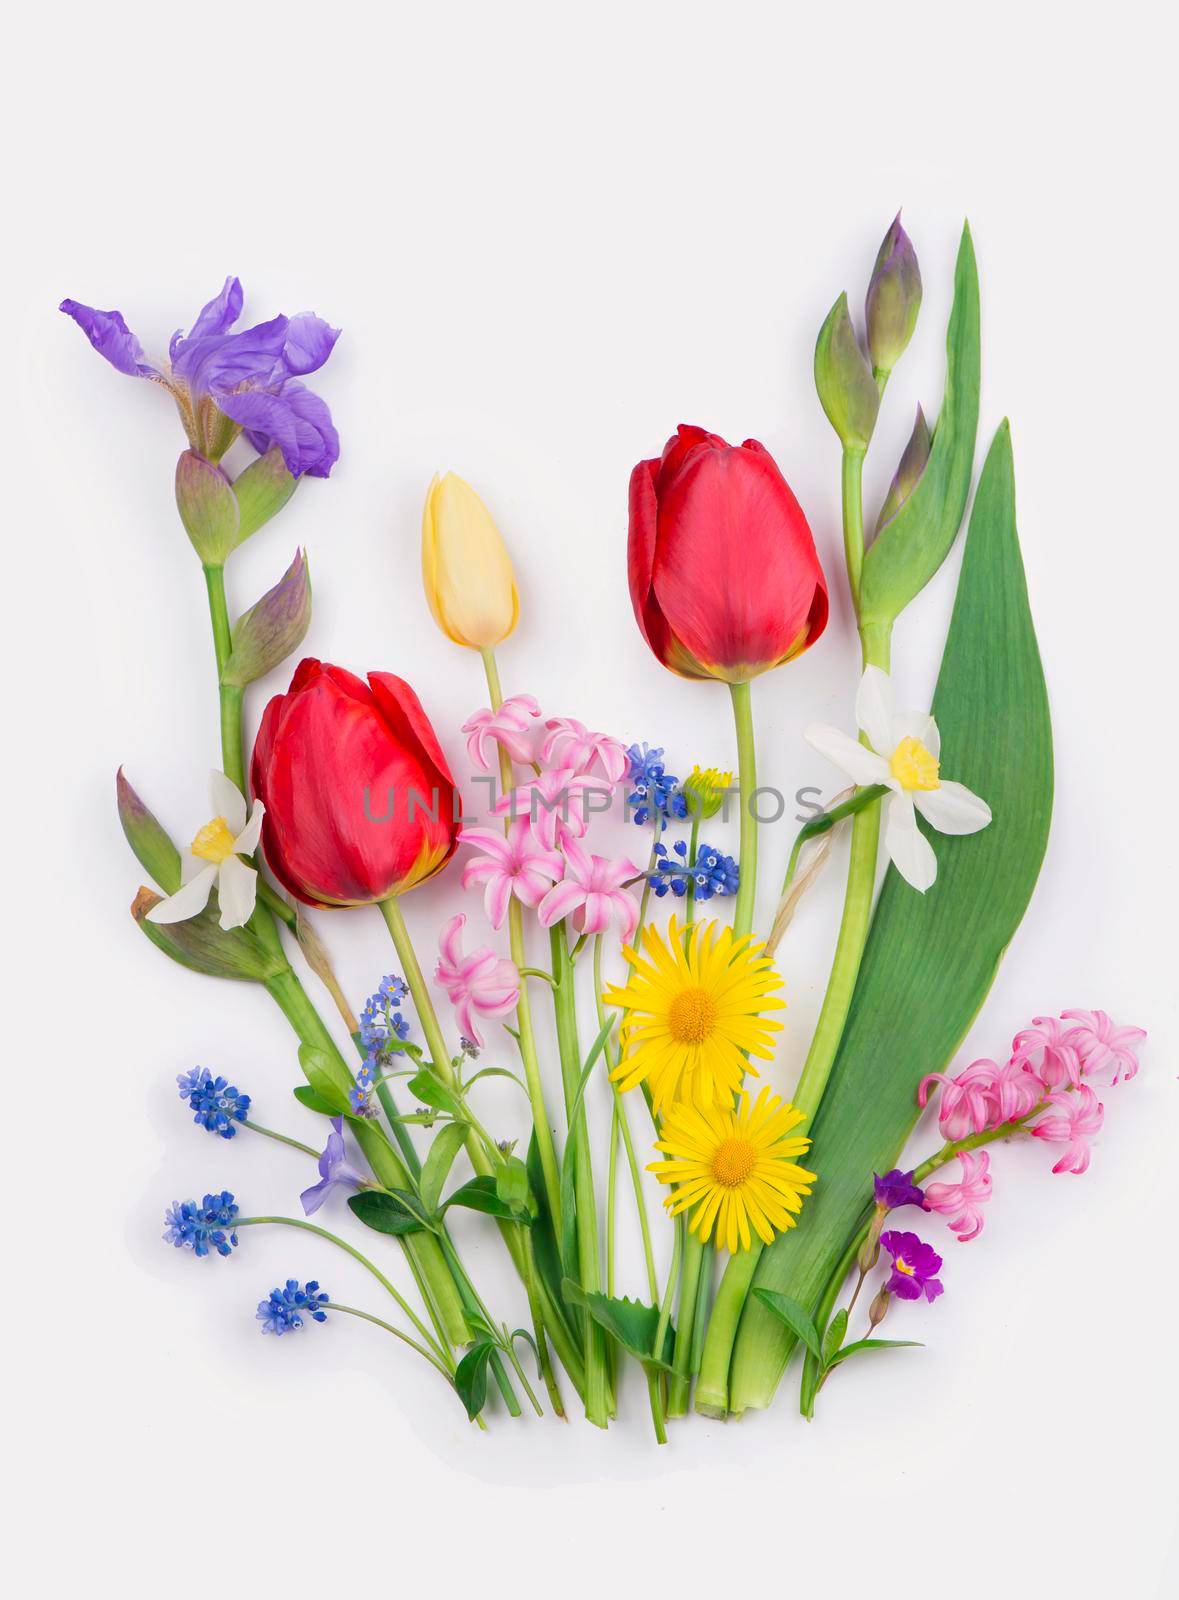 Spring flowers daffodils and tulips on white background by aprilphoto